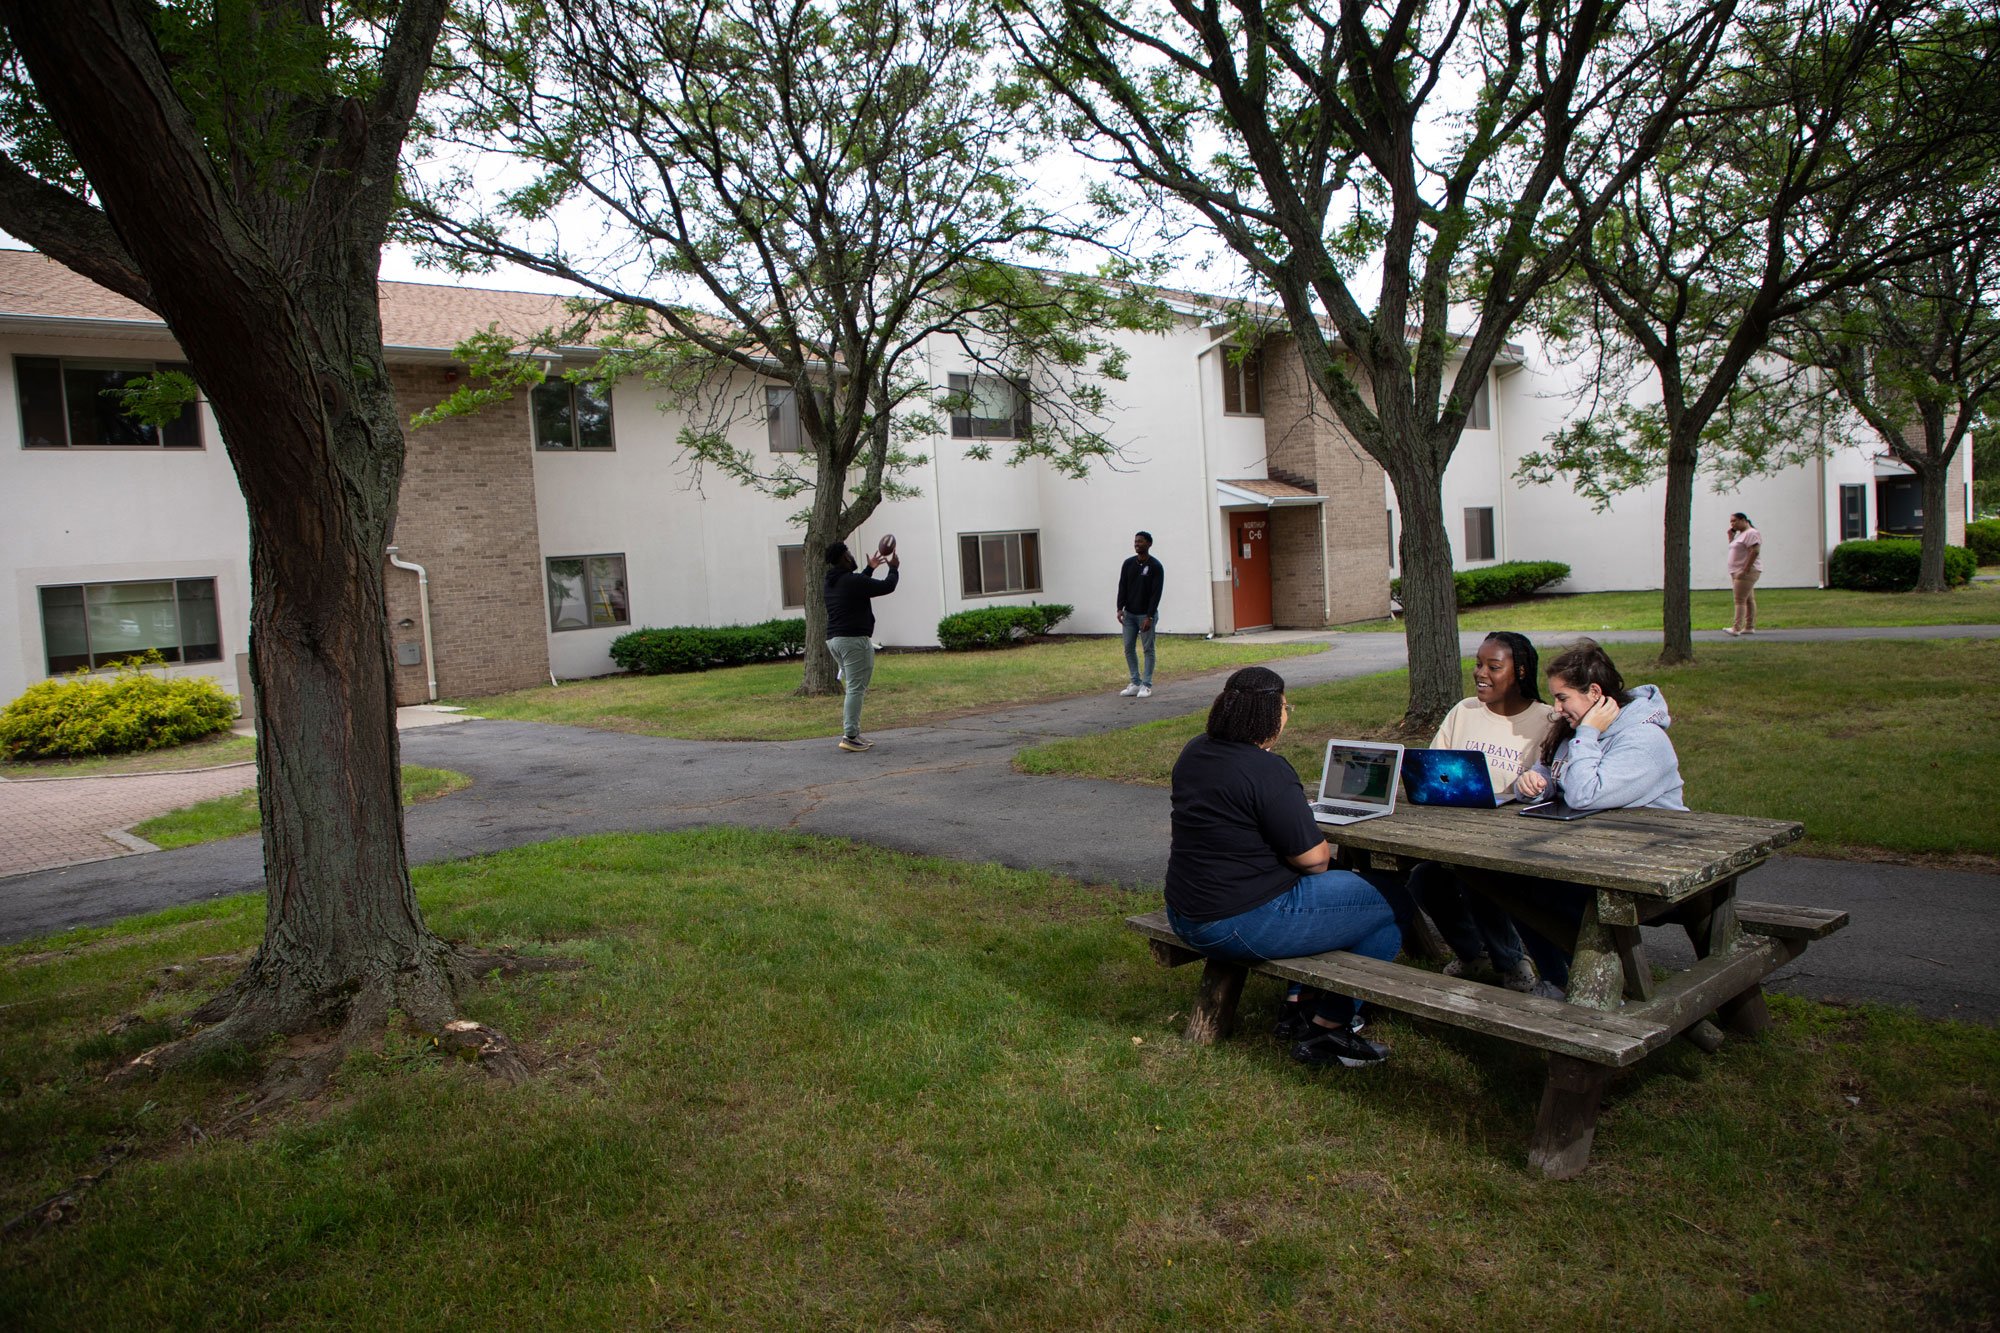 Three students sit with laptops at a picnic table outside Freedom Apartments, while two other students play catch with a football behind them.